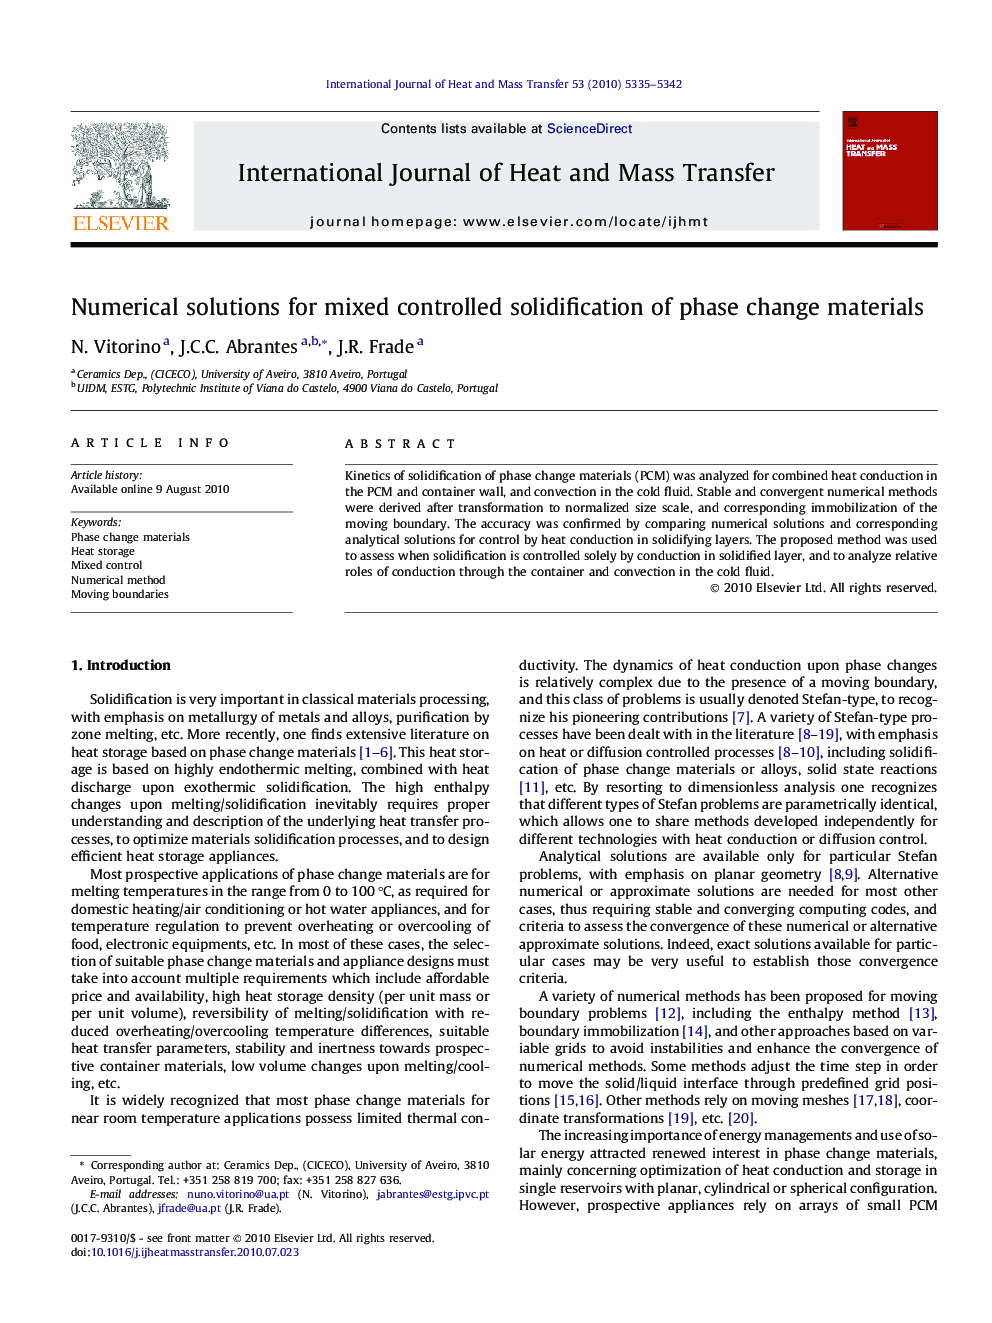 Numerical solutions for mixed controlled solidification of phase change materials